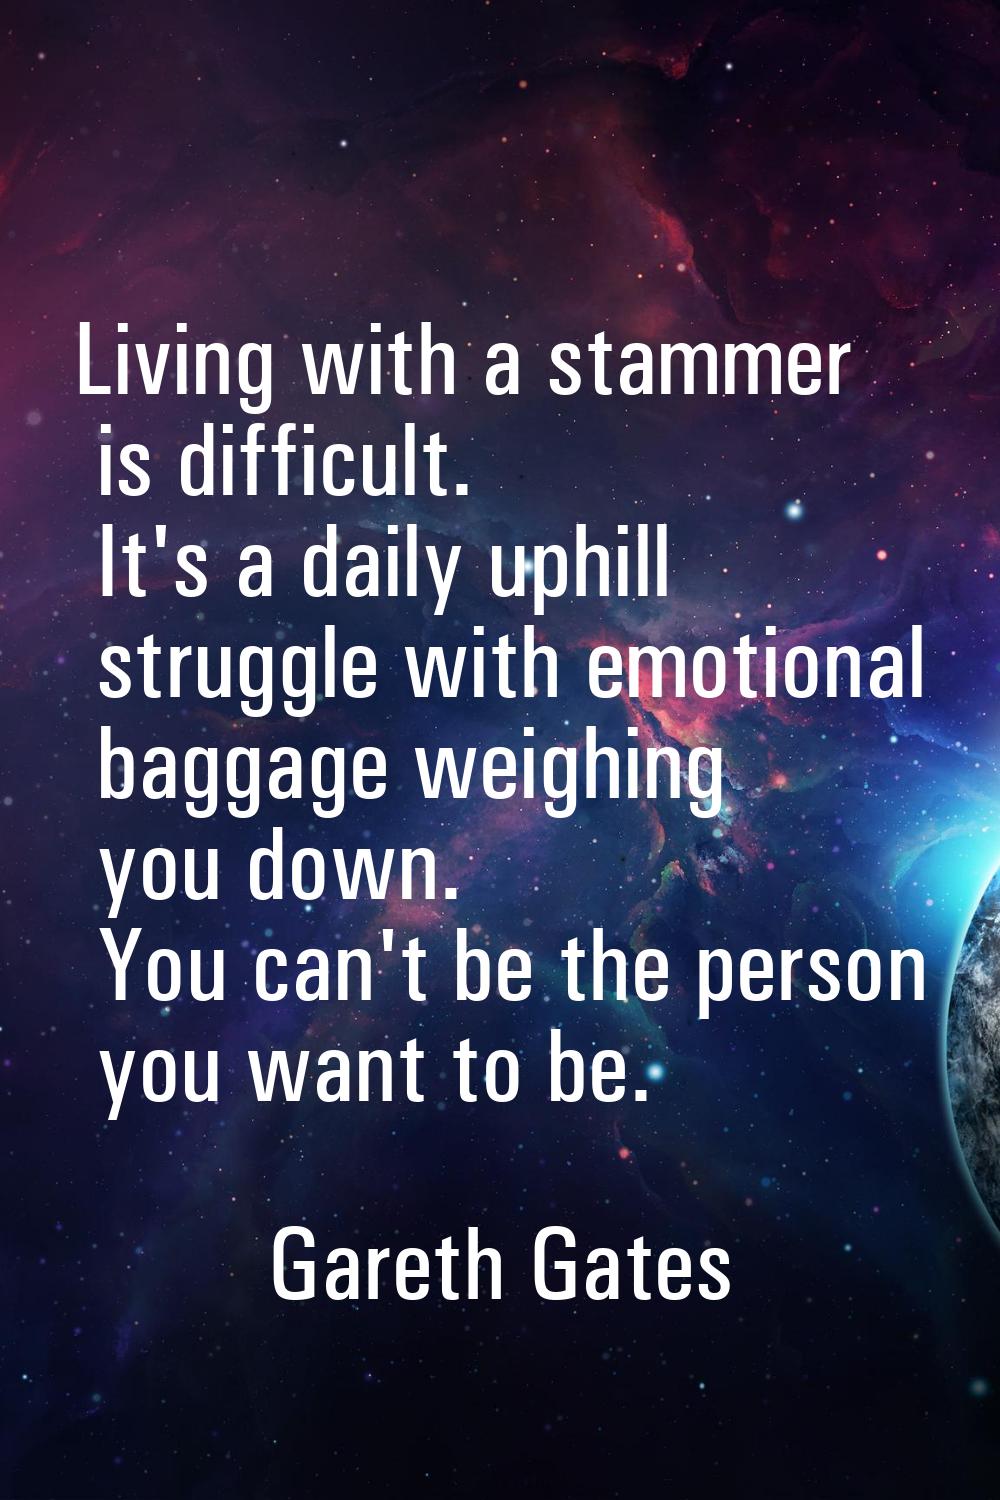 Living with a stammer is difficult. It's a daily uphill struggle with emotional baggage weighing yo